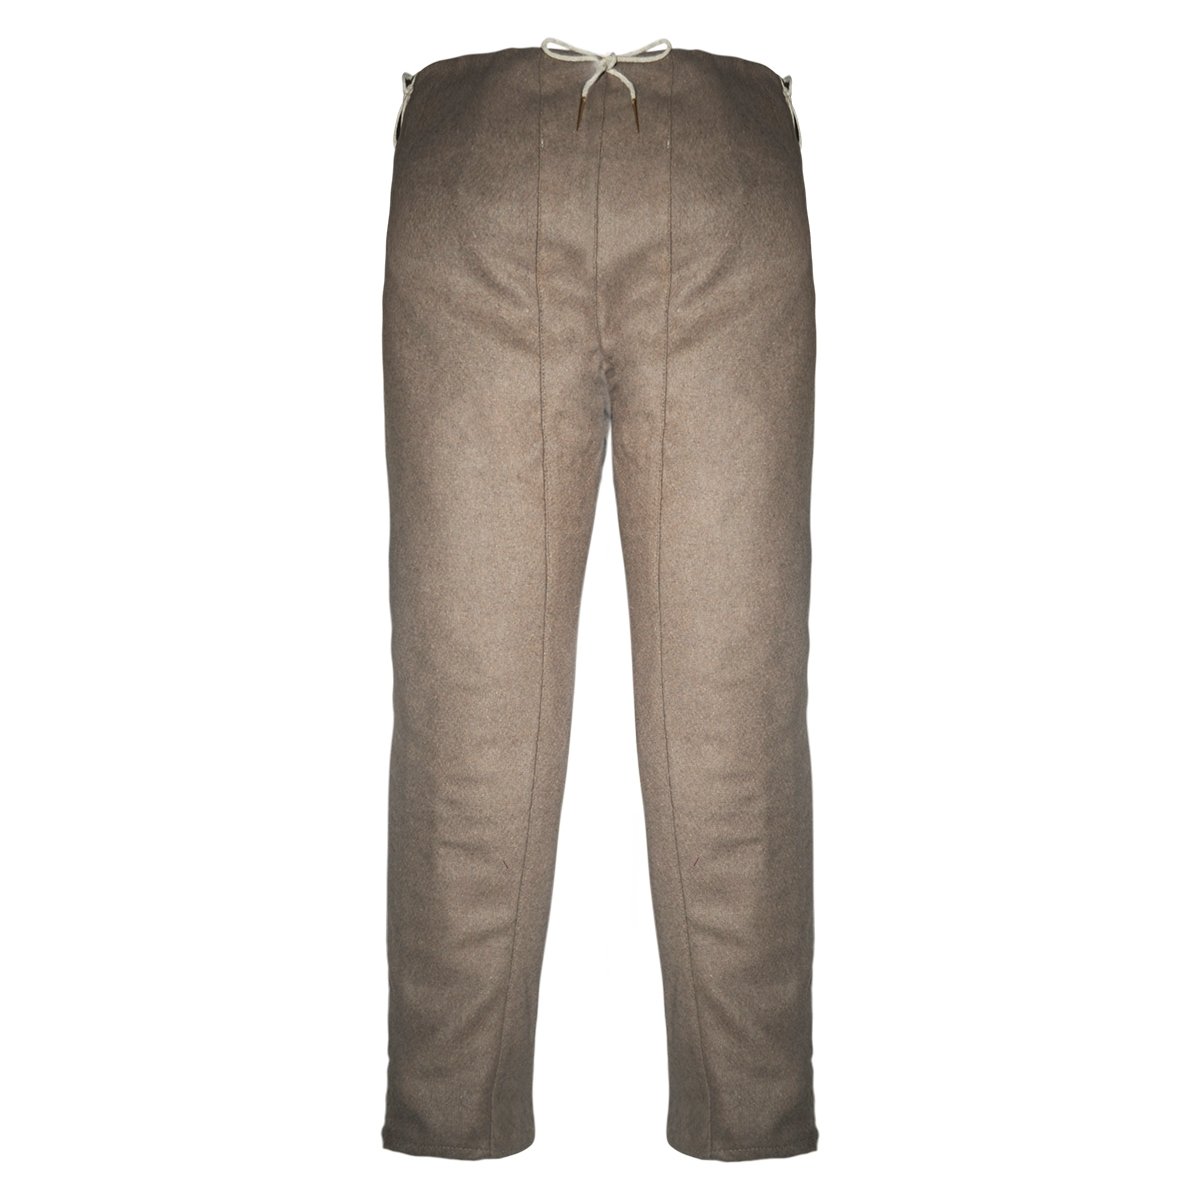 Man's 15th C. Trousers - Natural Brown, Size XXL